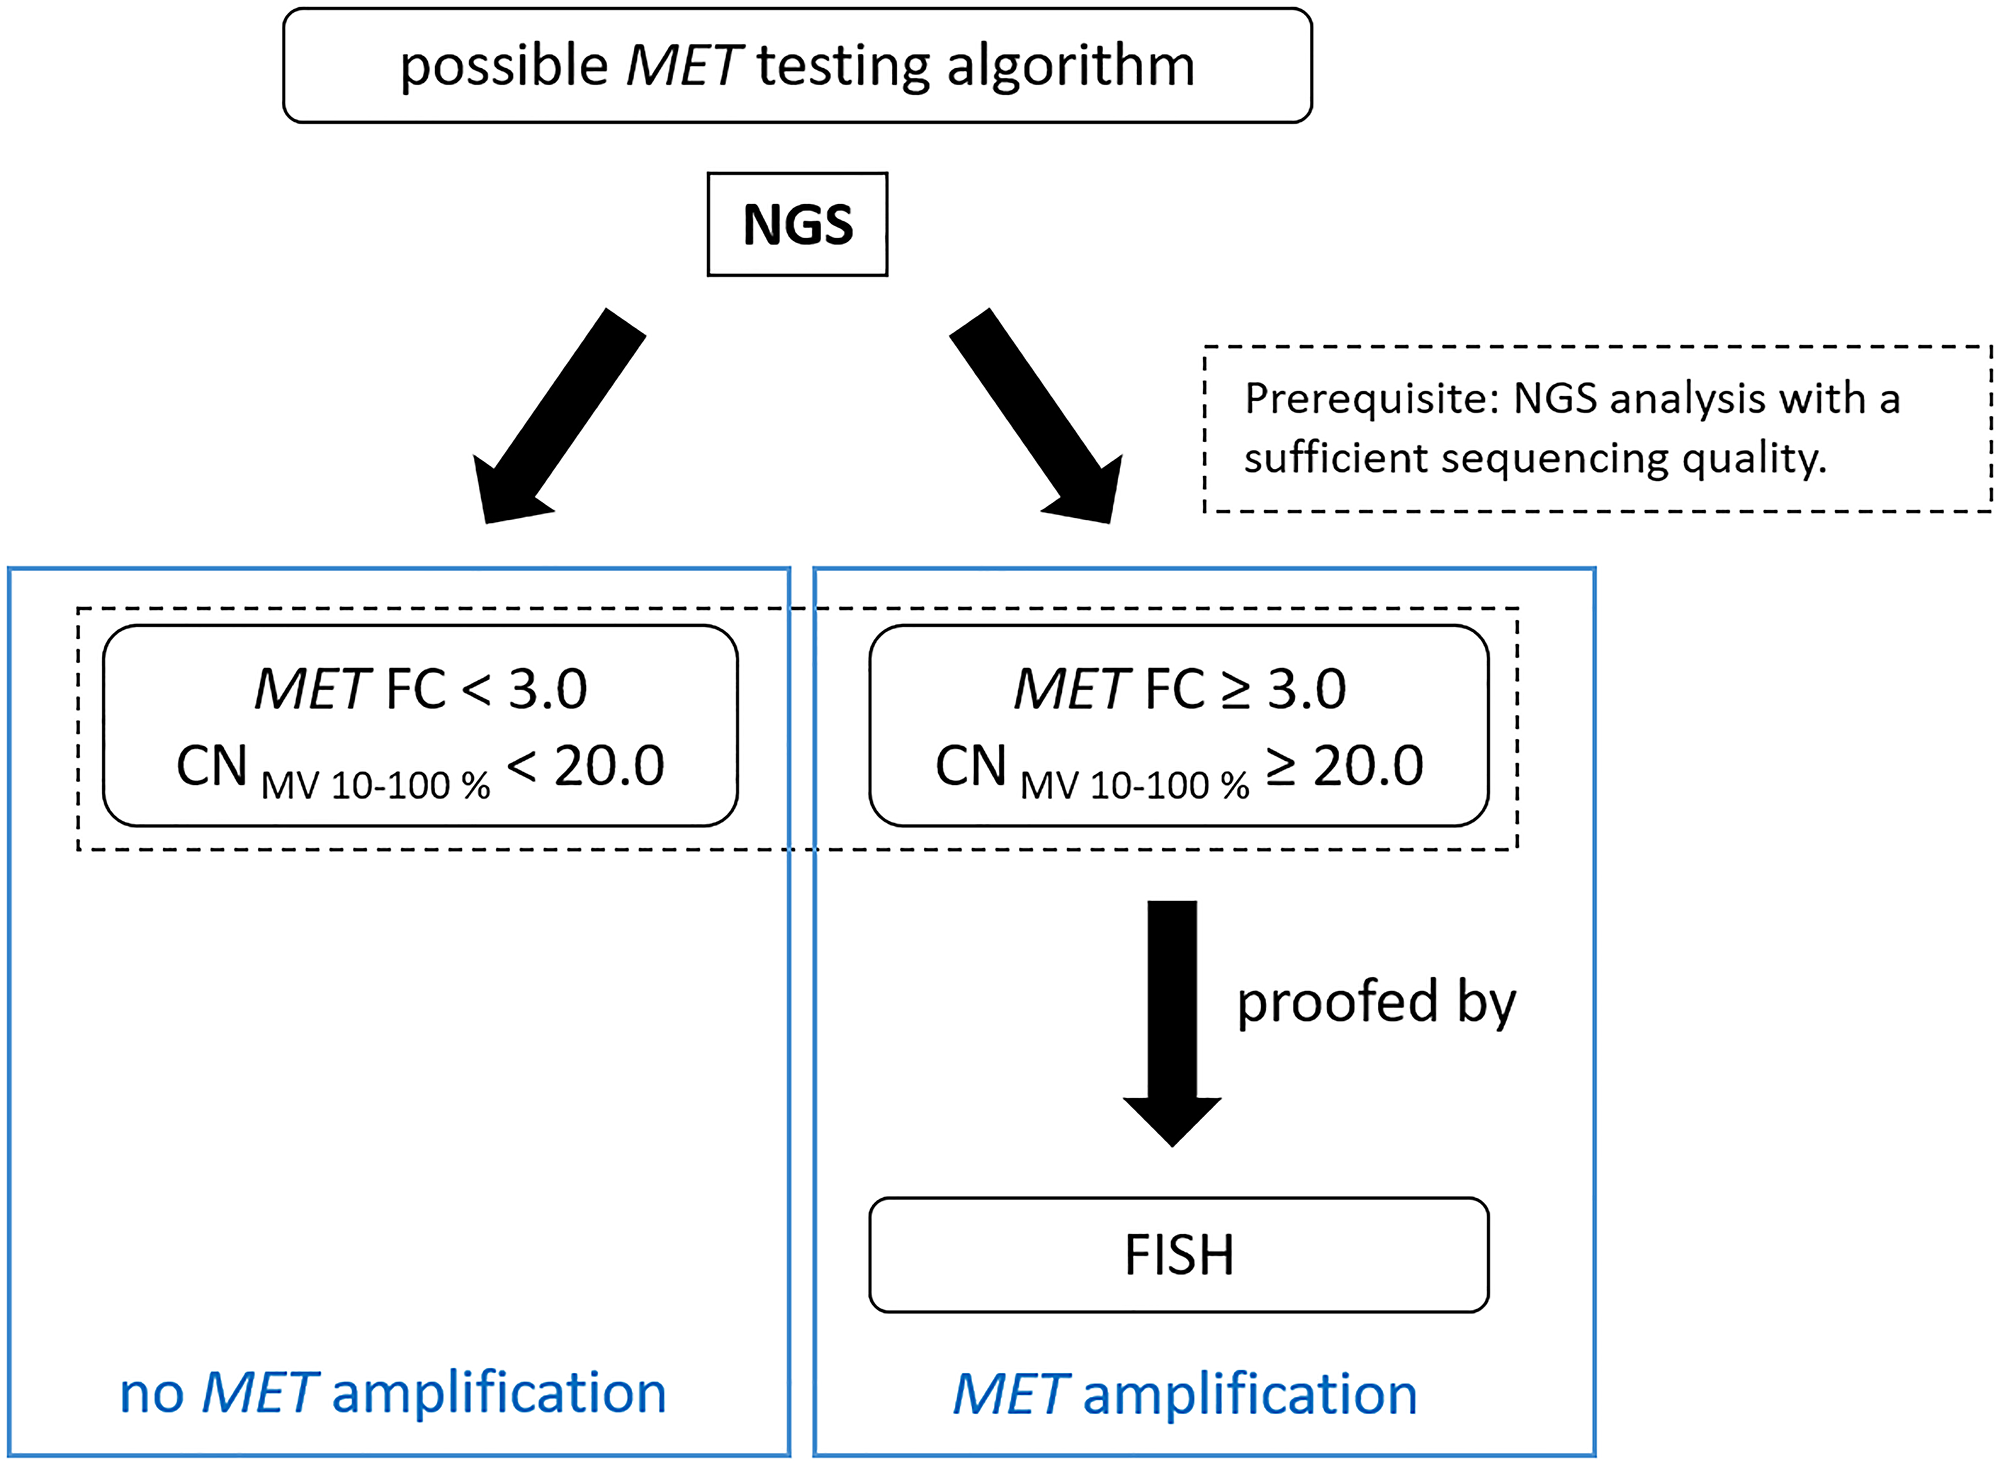 Figure 3: Suggested testing workflow for the detection of MET amplifications by QIAGEN workflow.